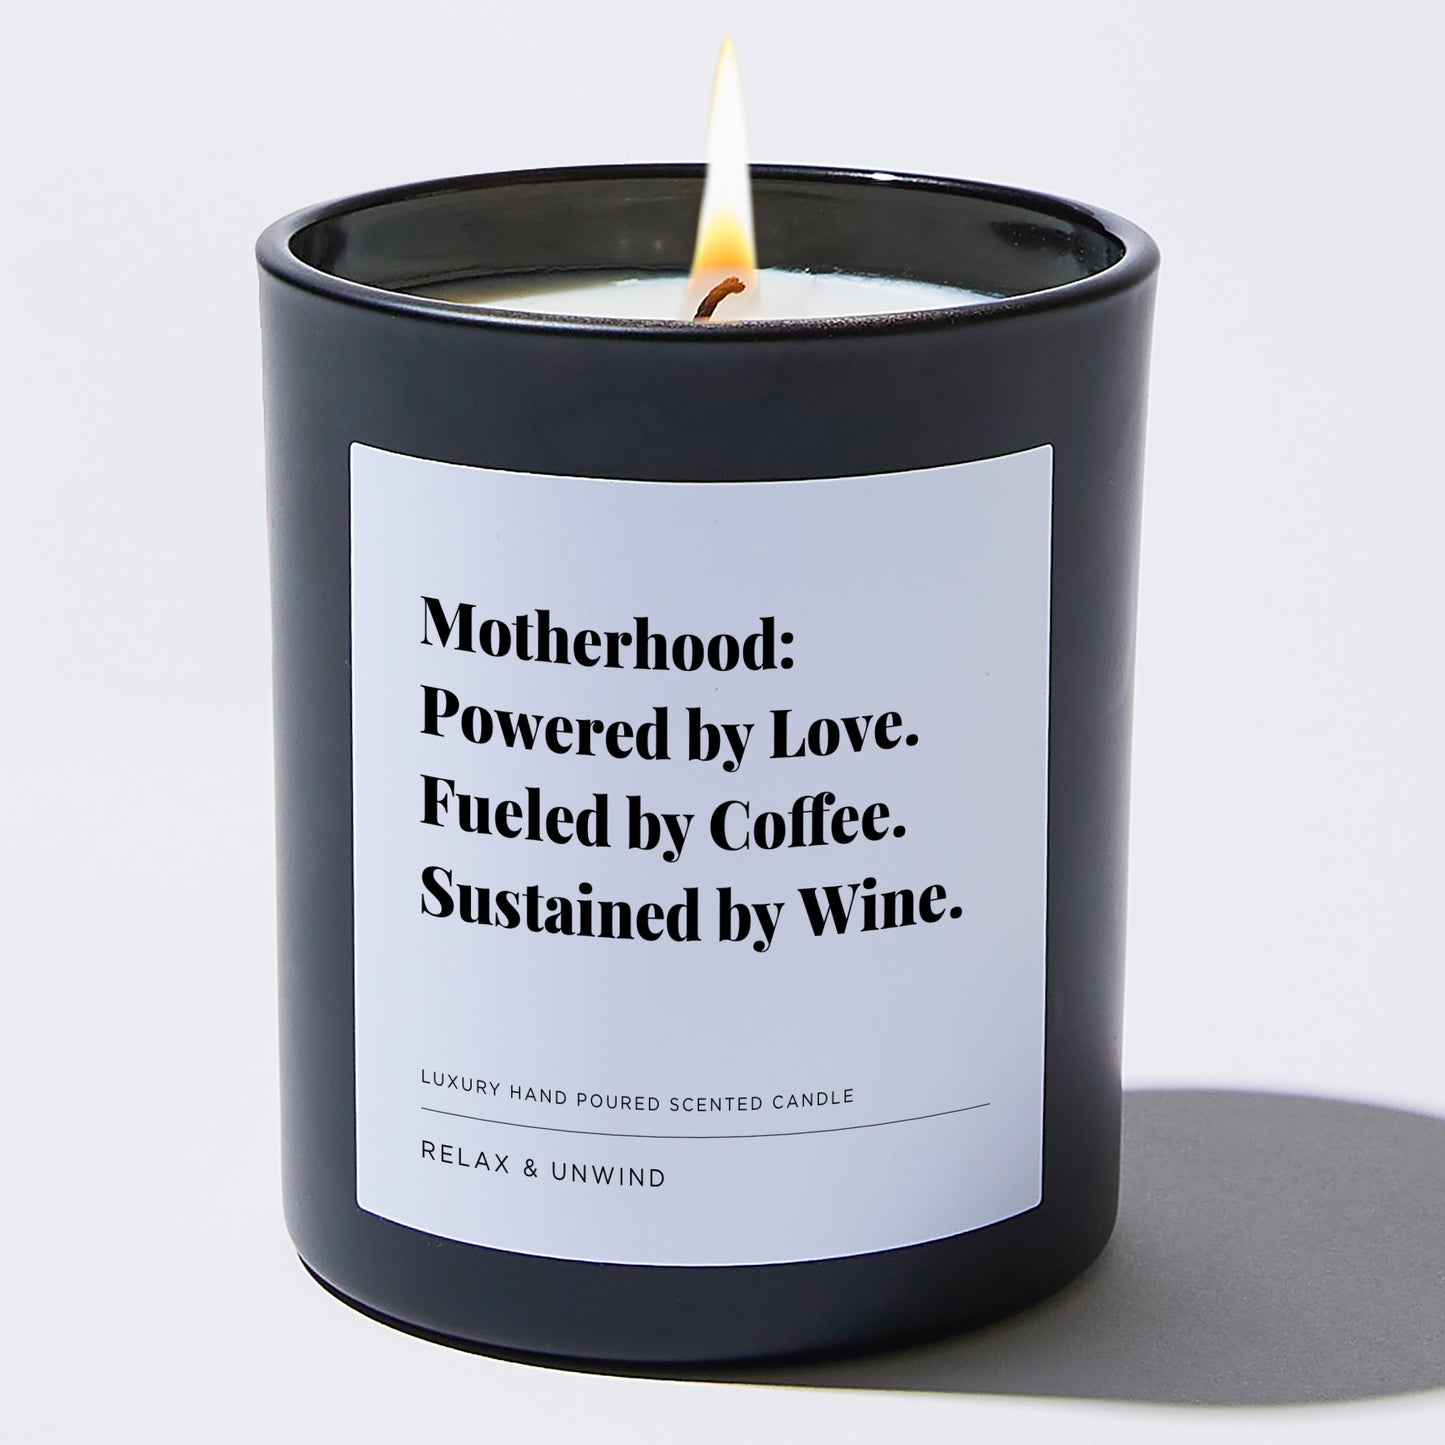 Gift for Mom Motherhood: Powered by love. Fueled by coffee. Sustained by wine.